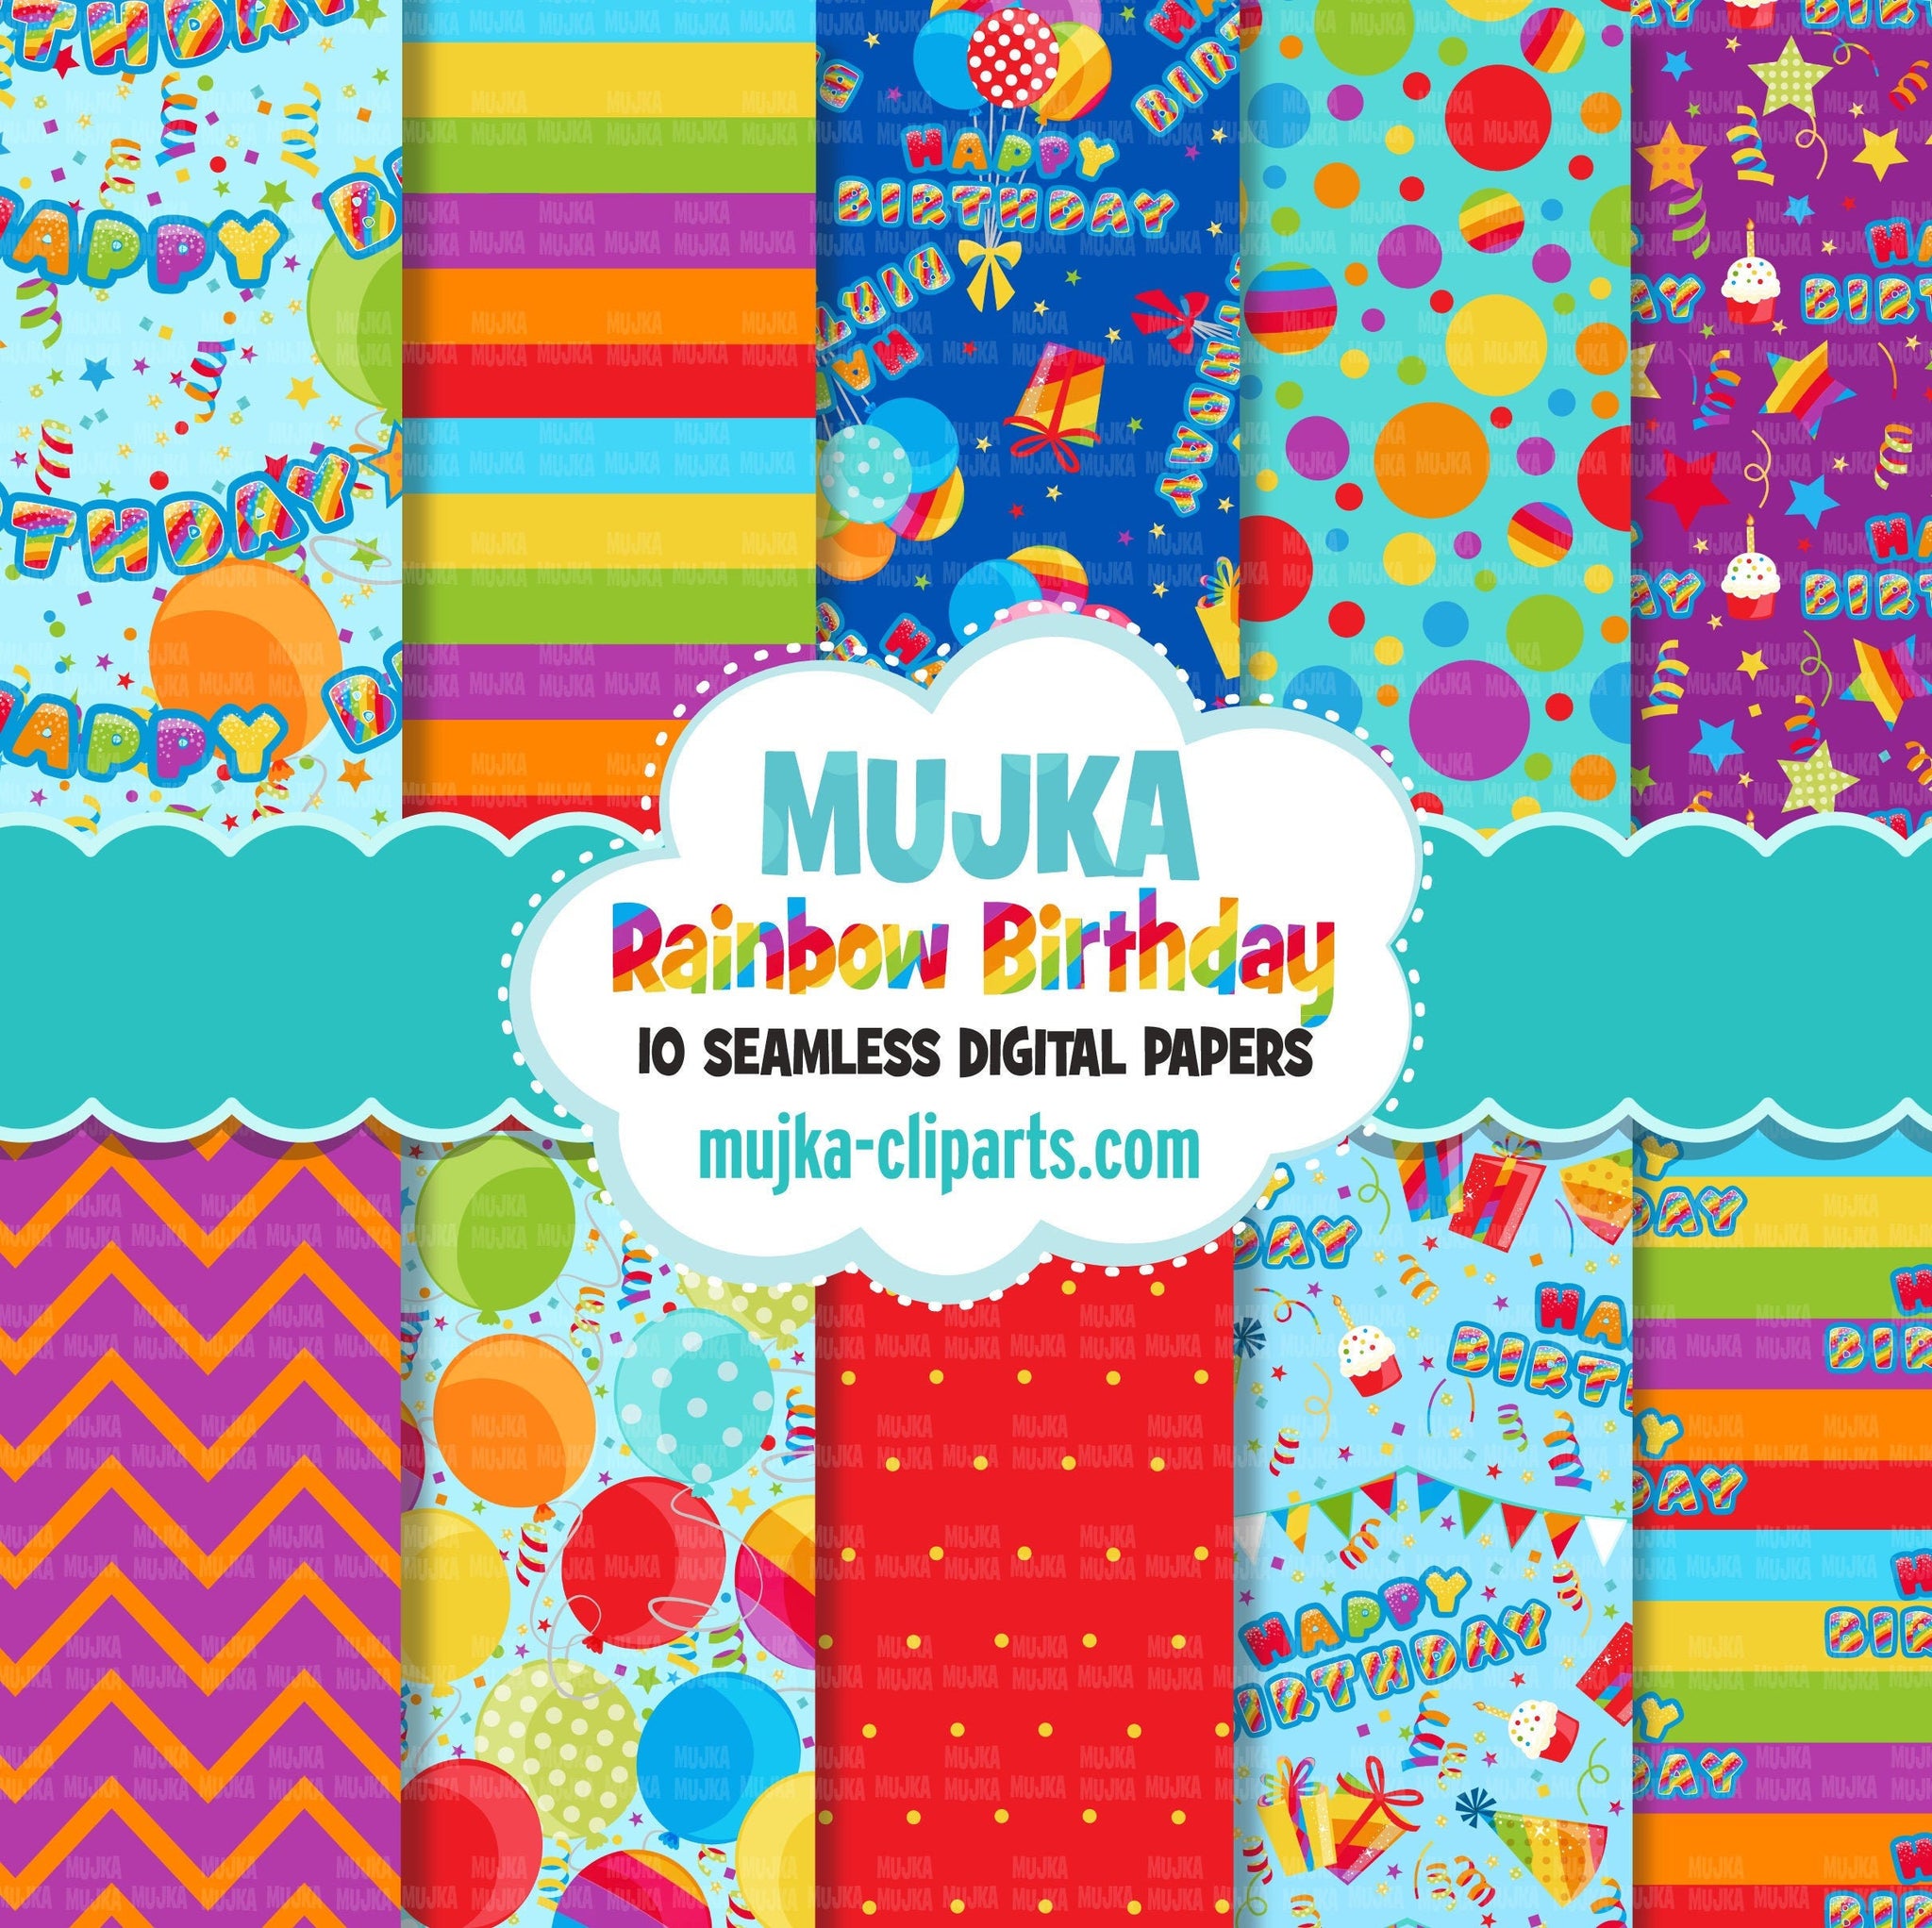 Rainbow Birthday Digital papers, seamless pattern, digital paper pack, printable pattern, digital background, birthday party papers